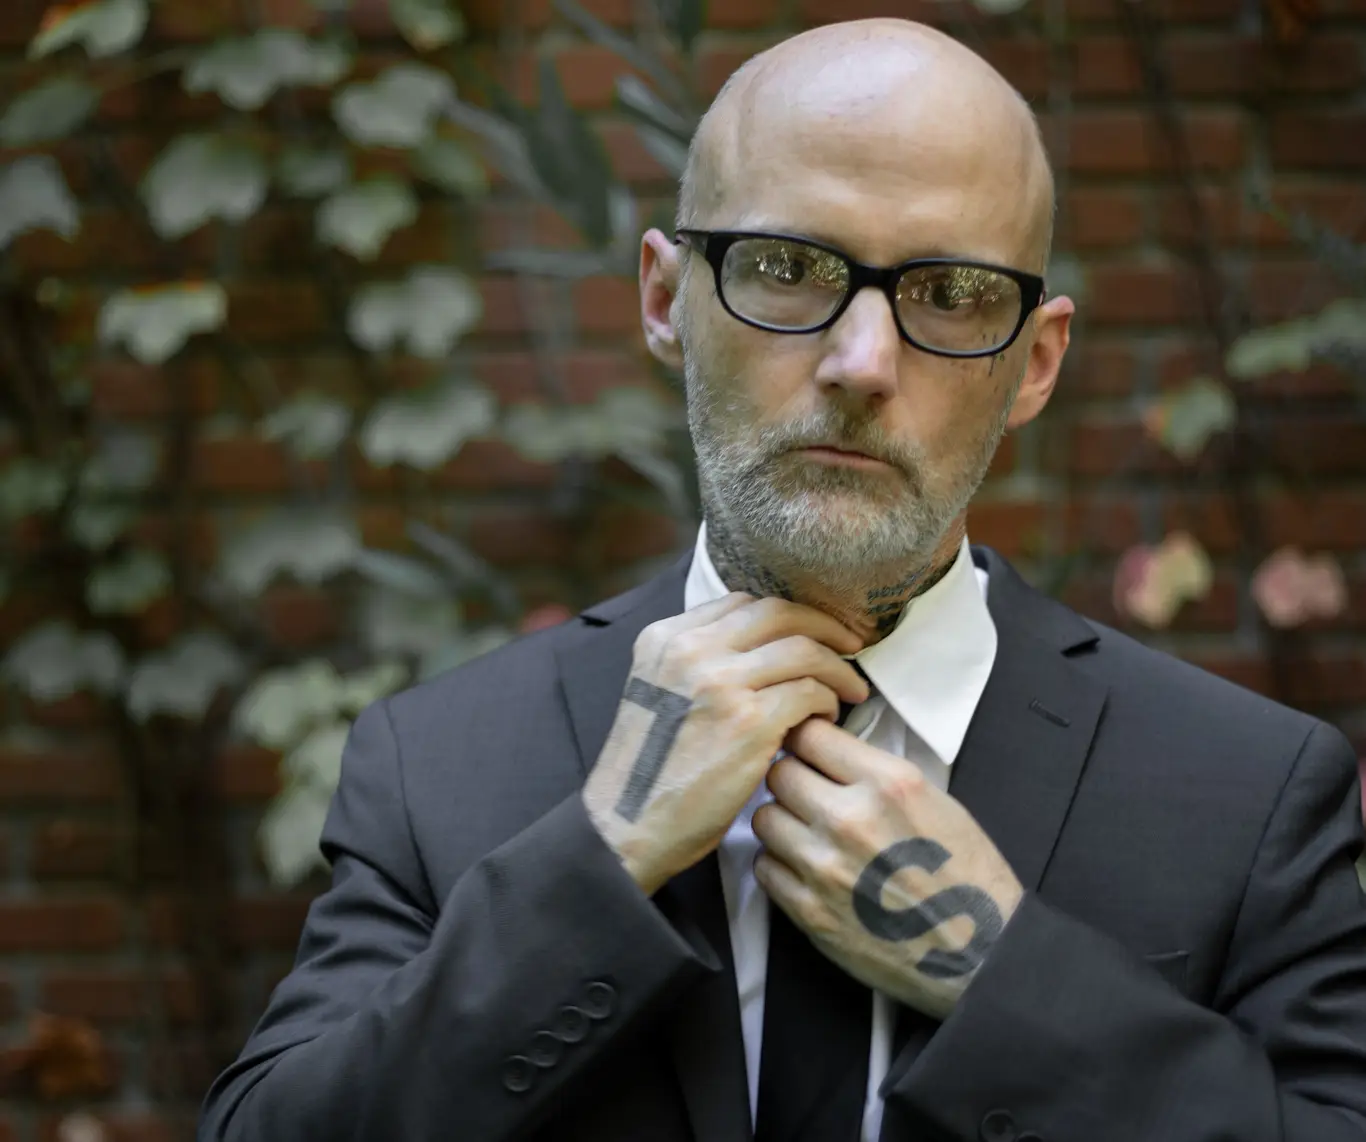 MOBY releases the orchestral rework of ‘South Side’ featuring Kaiser Chiefs’ Ricky Wilson